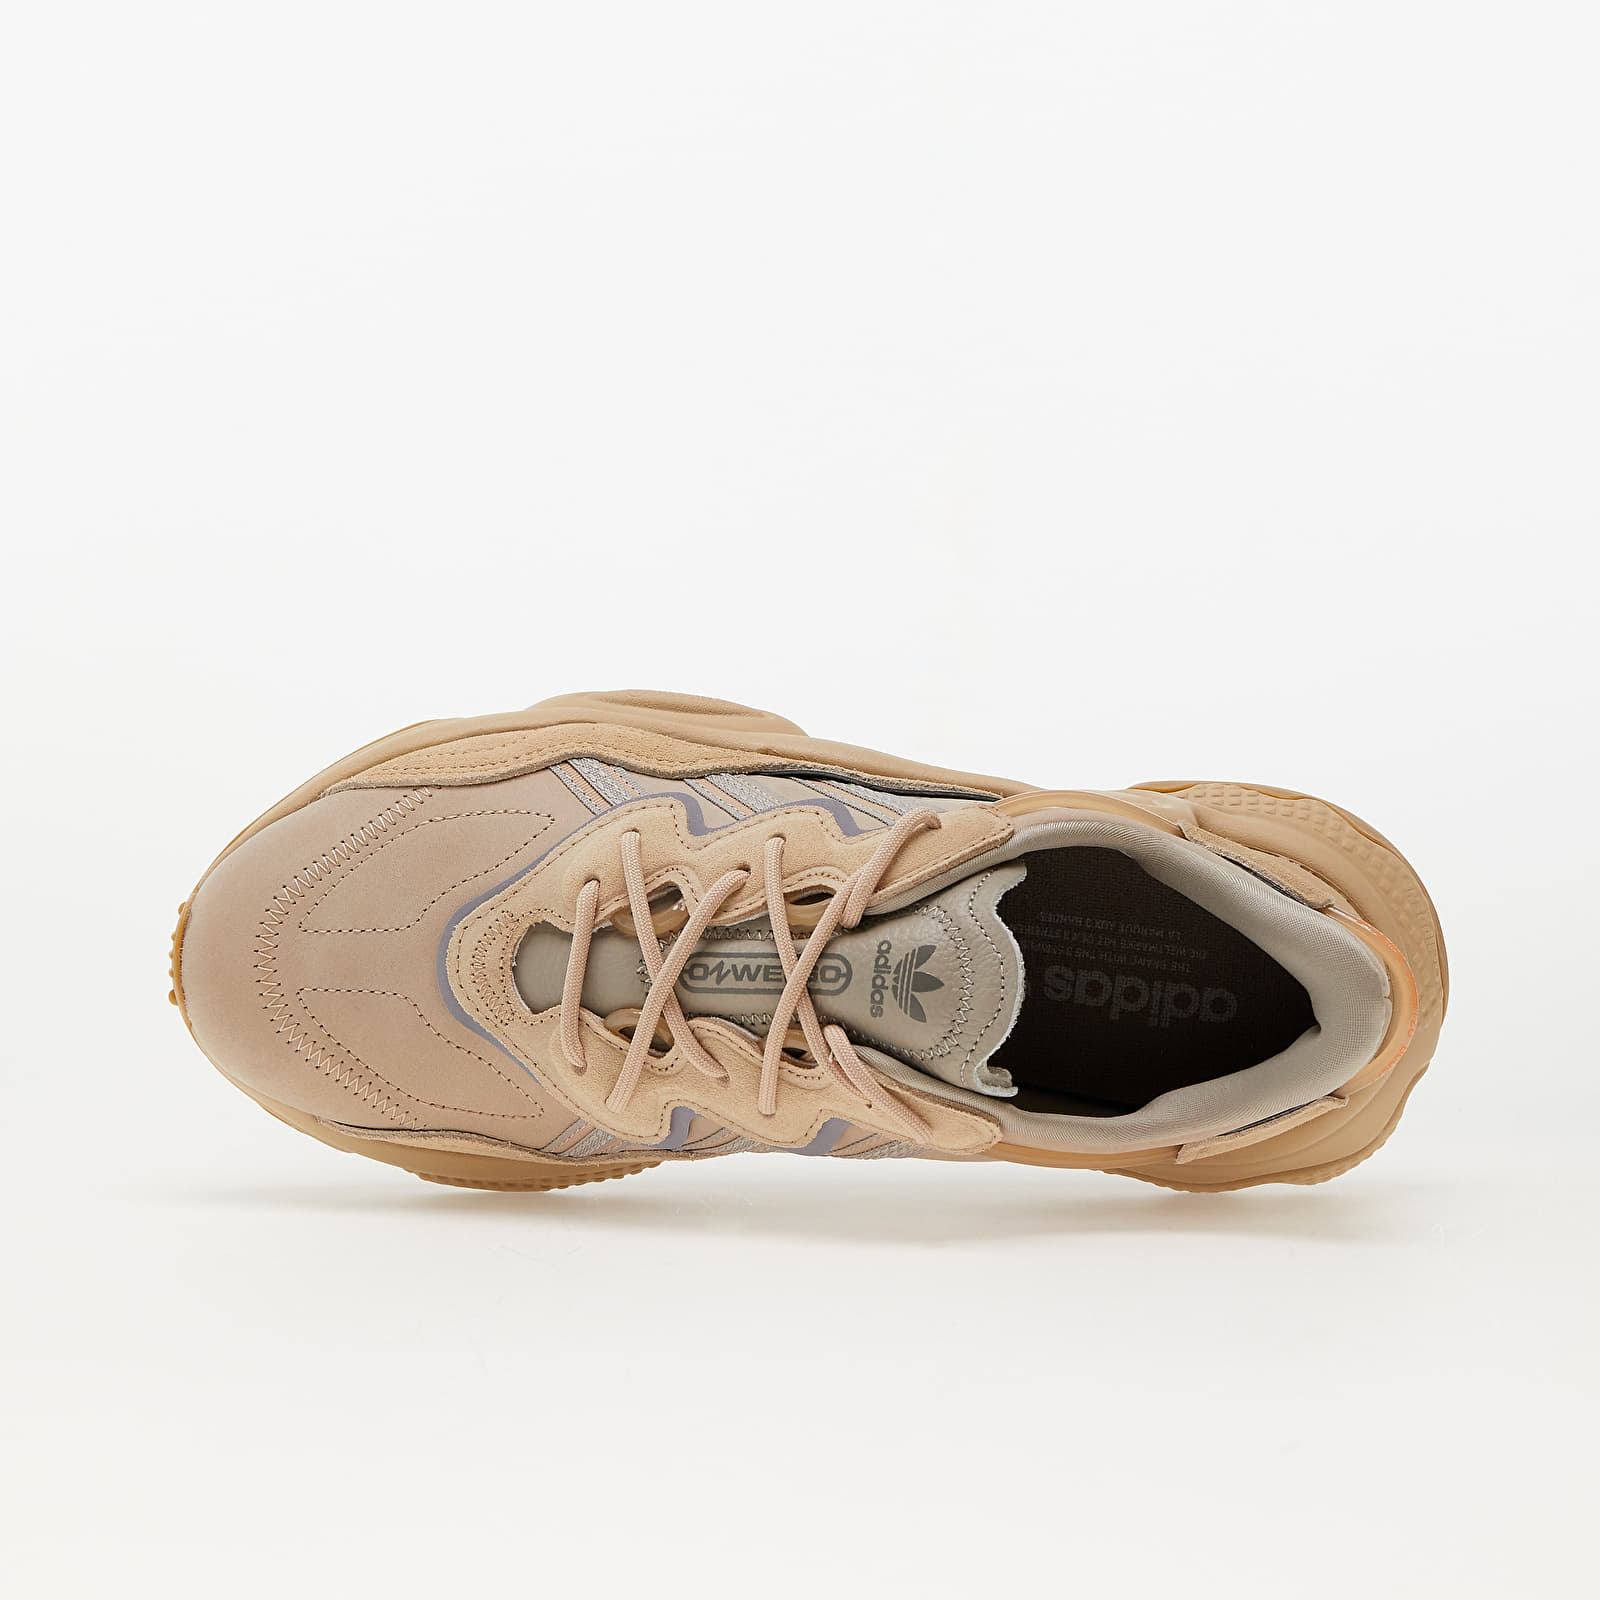 Men's shoes adidas Ozweego St Pale Nude/ Light Brown/ Solar Red | Footshop